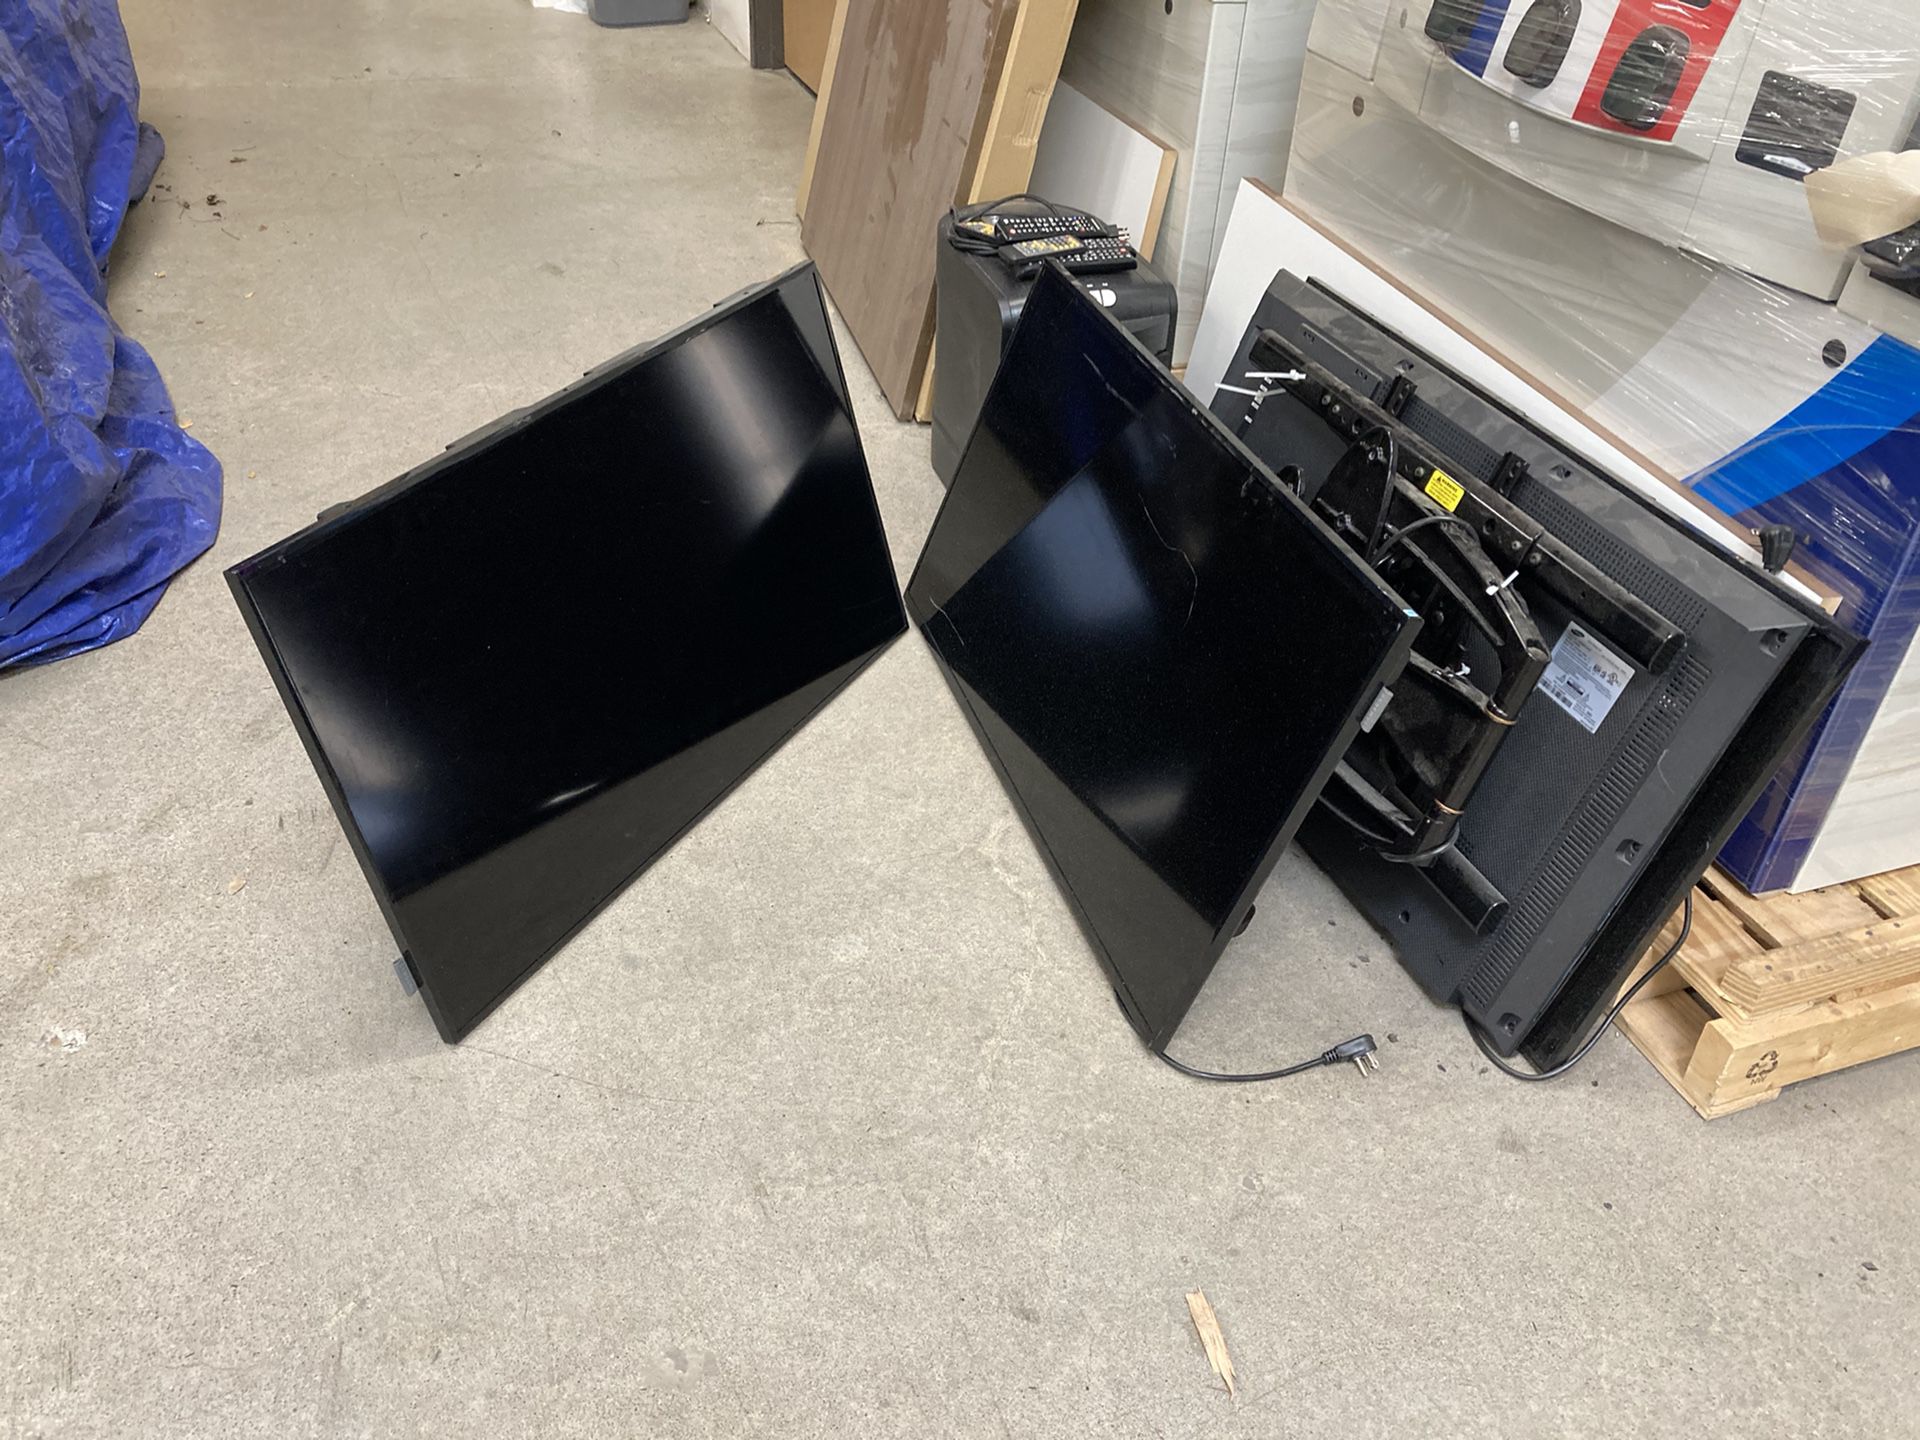 40 inch Samsung TVs with mounting brackets